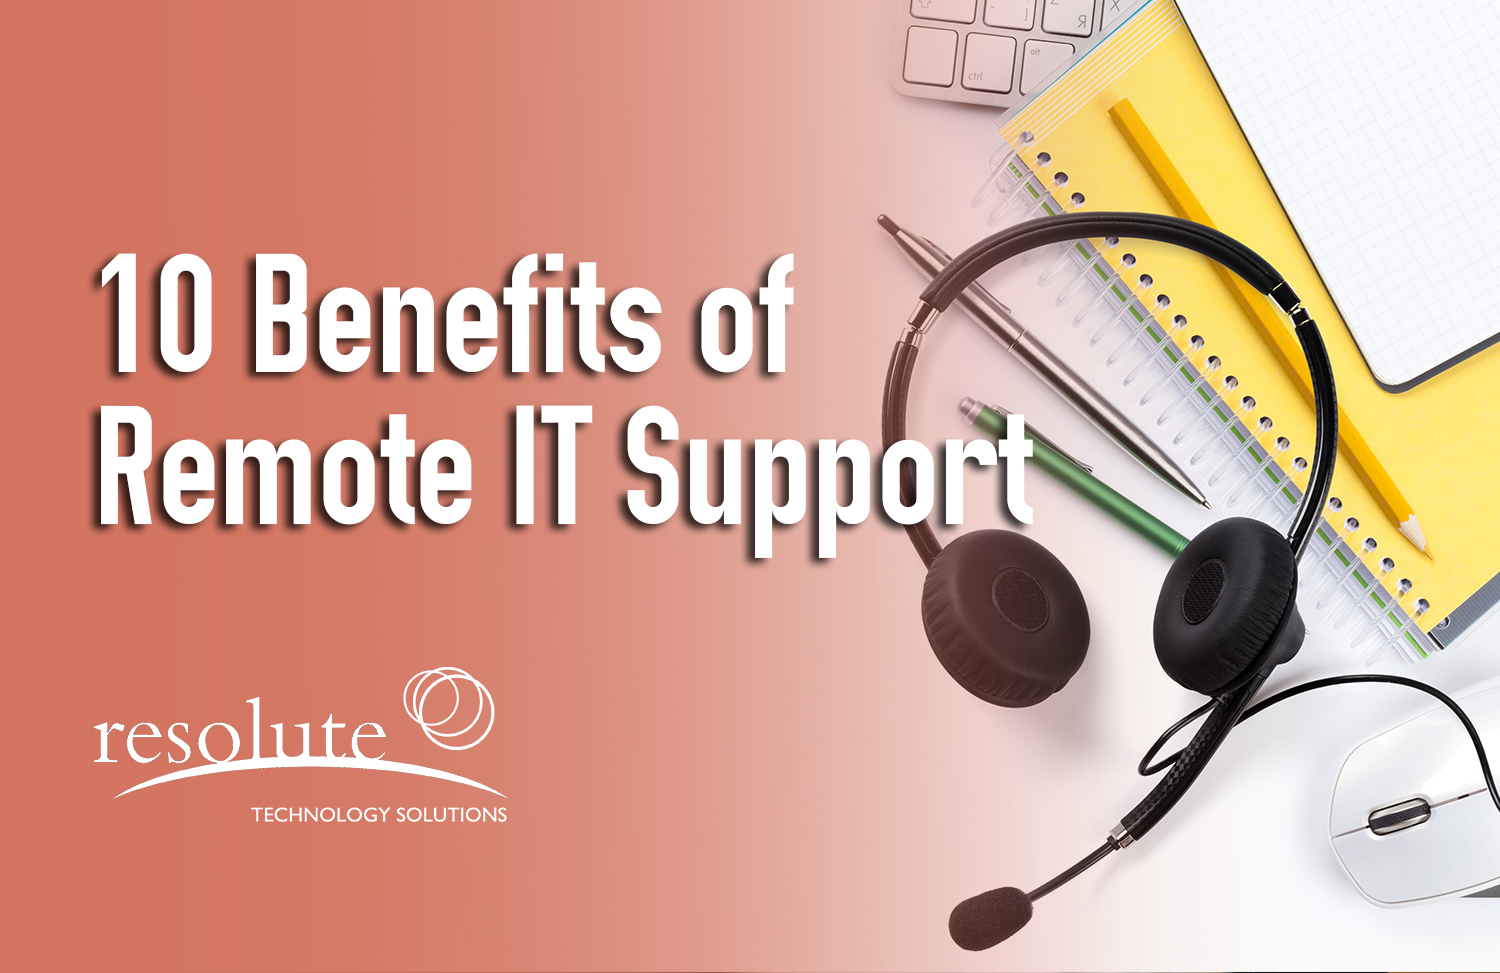 10 Benefits of Remote IT Support